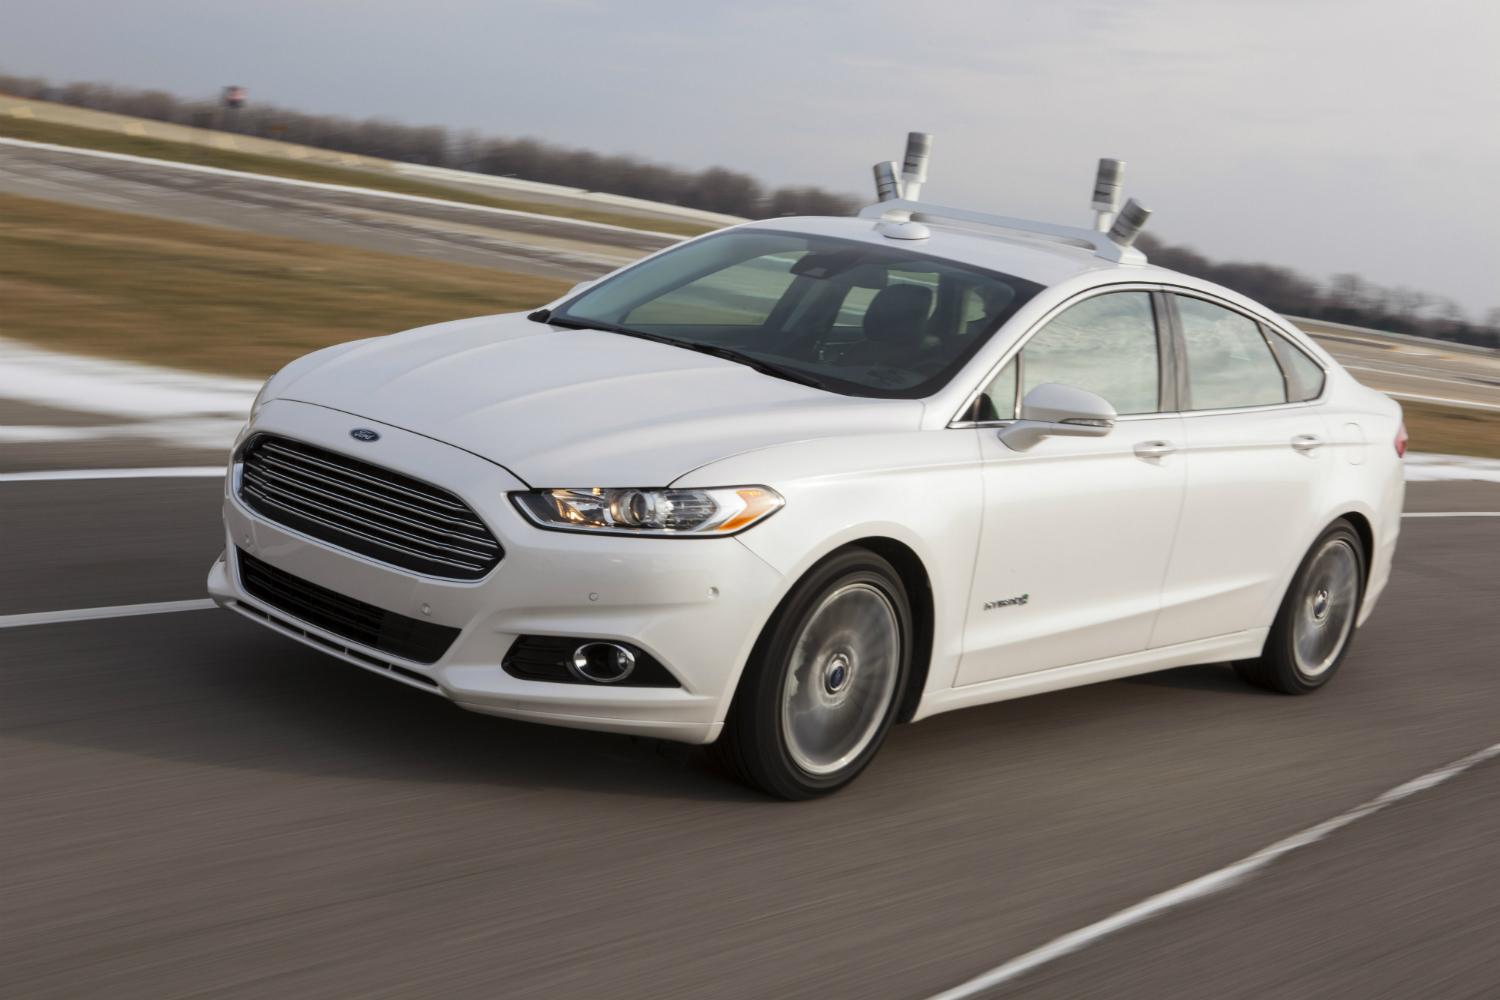 ford releases fusion hybrid research vehicle will explore autonomous driving tech 3